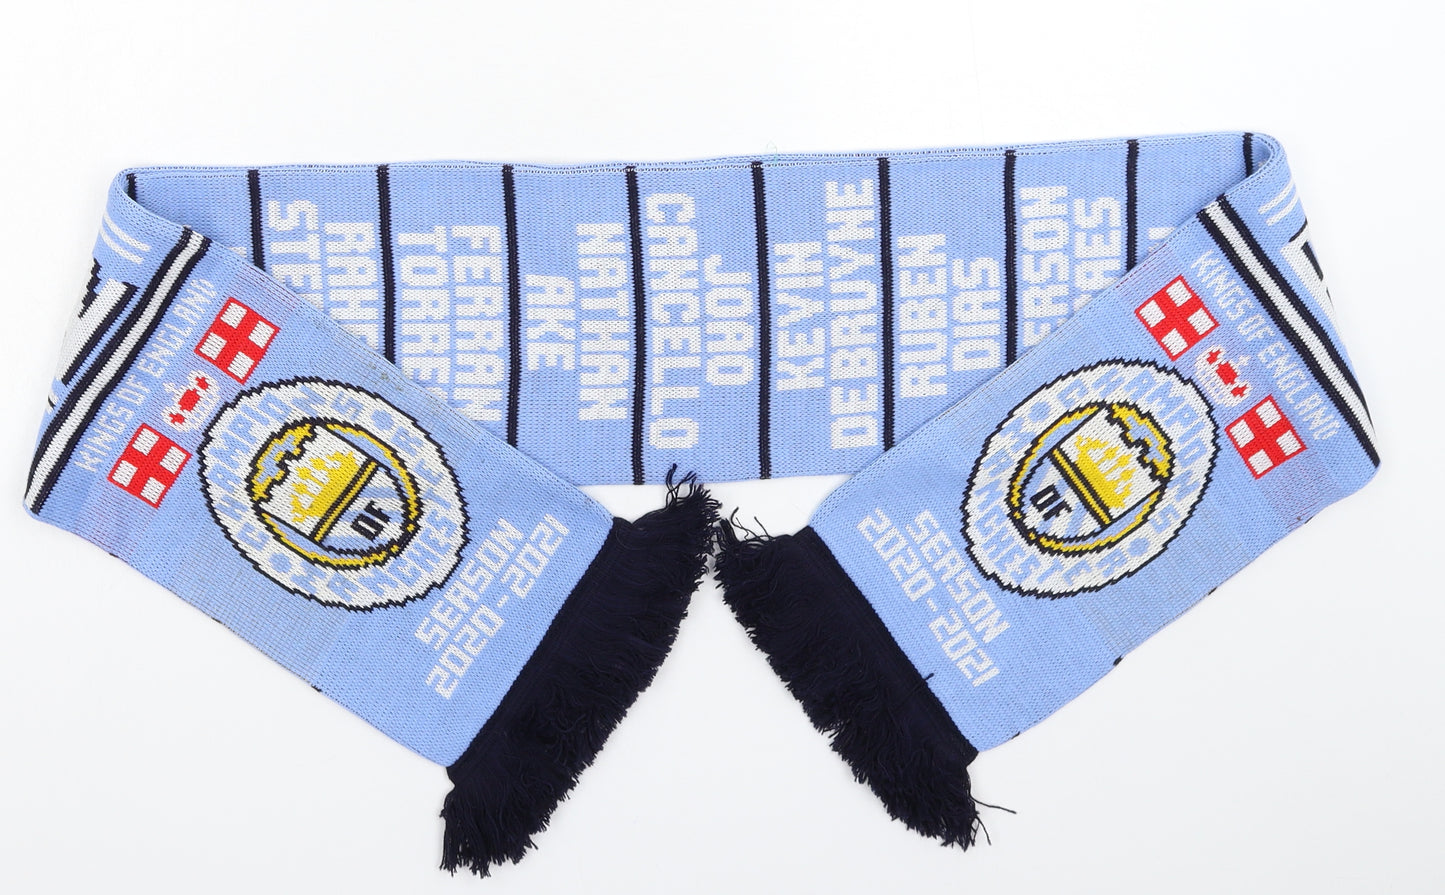 Manchester City FC Football Scarf 56 in 7 in